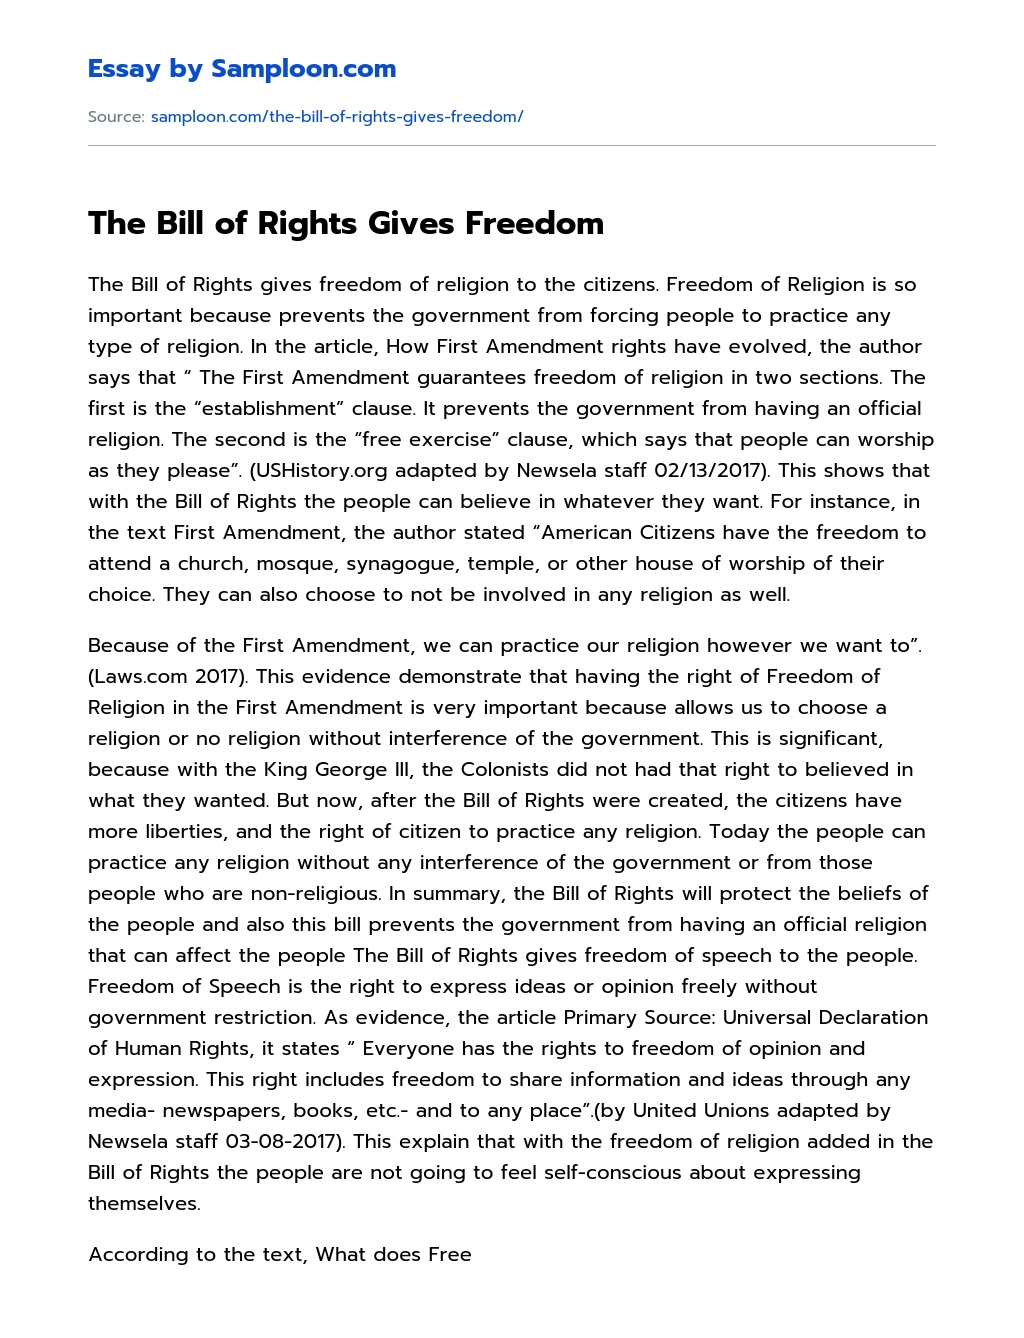 The Bill of Rights Gives Freedom essay